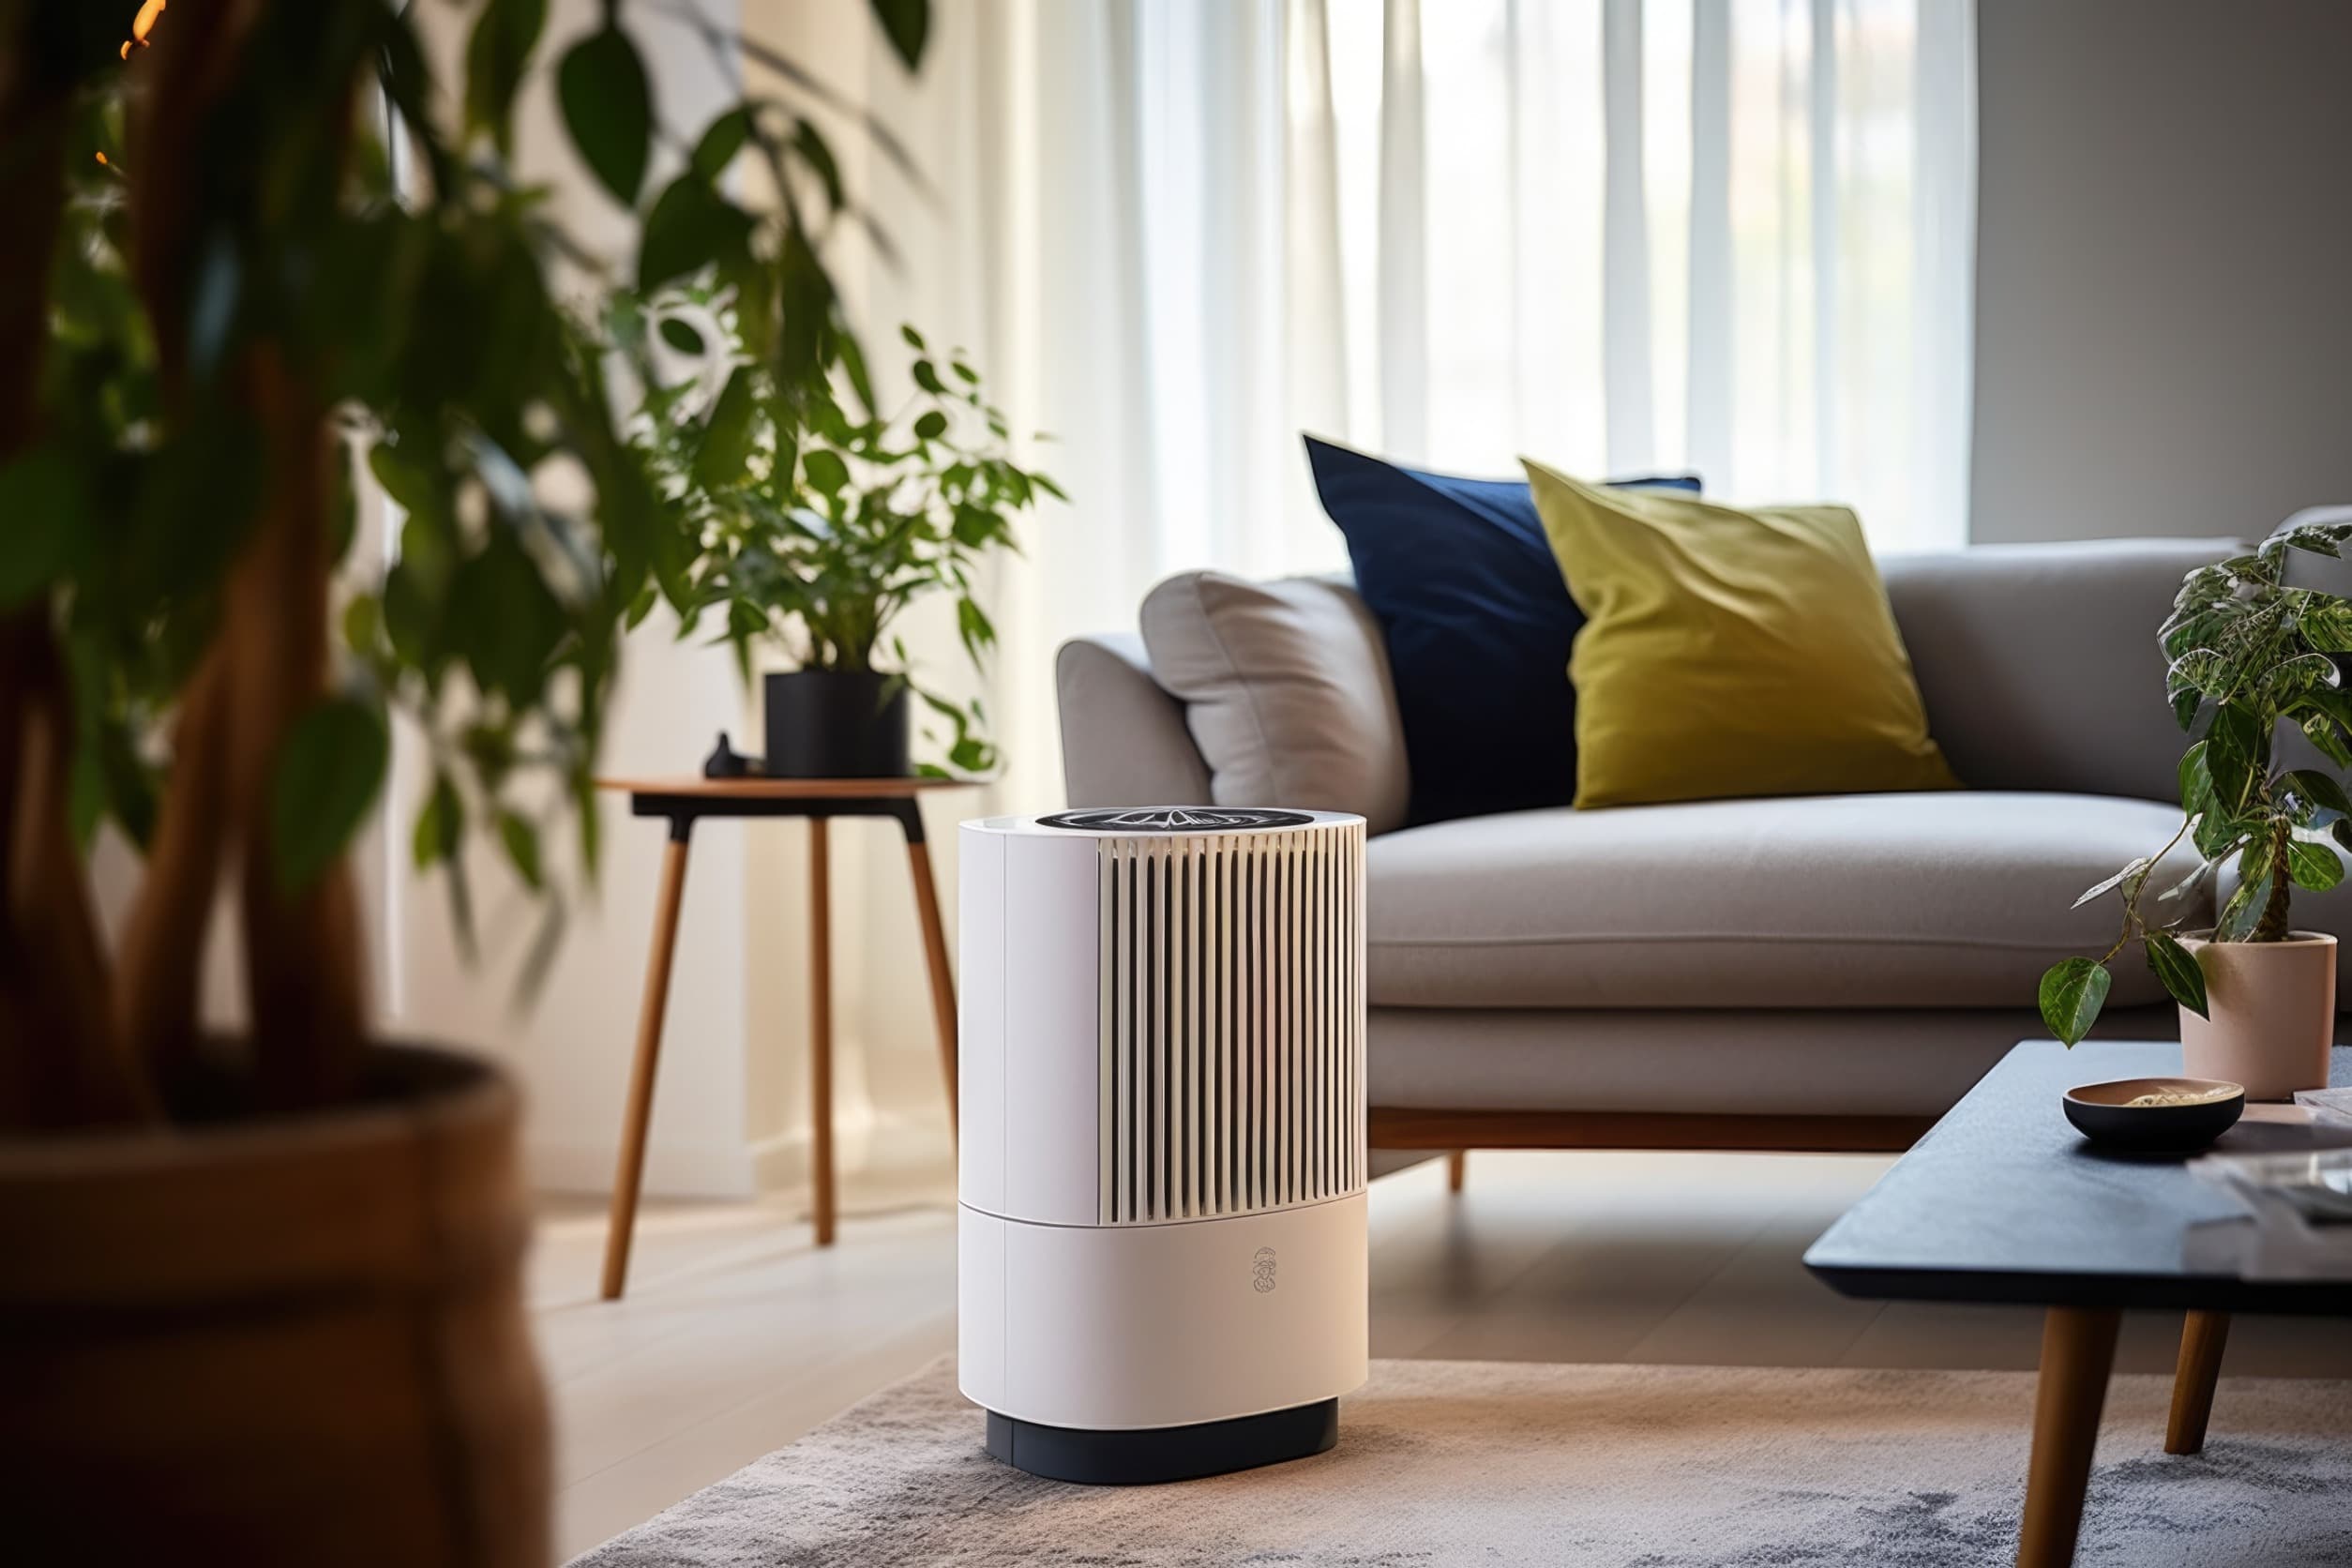 wide shot of a dehumidifier sitting in a living room